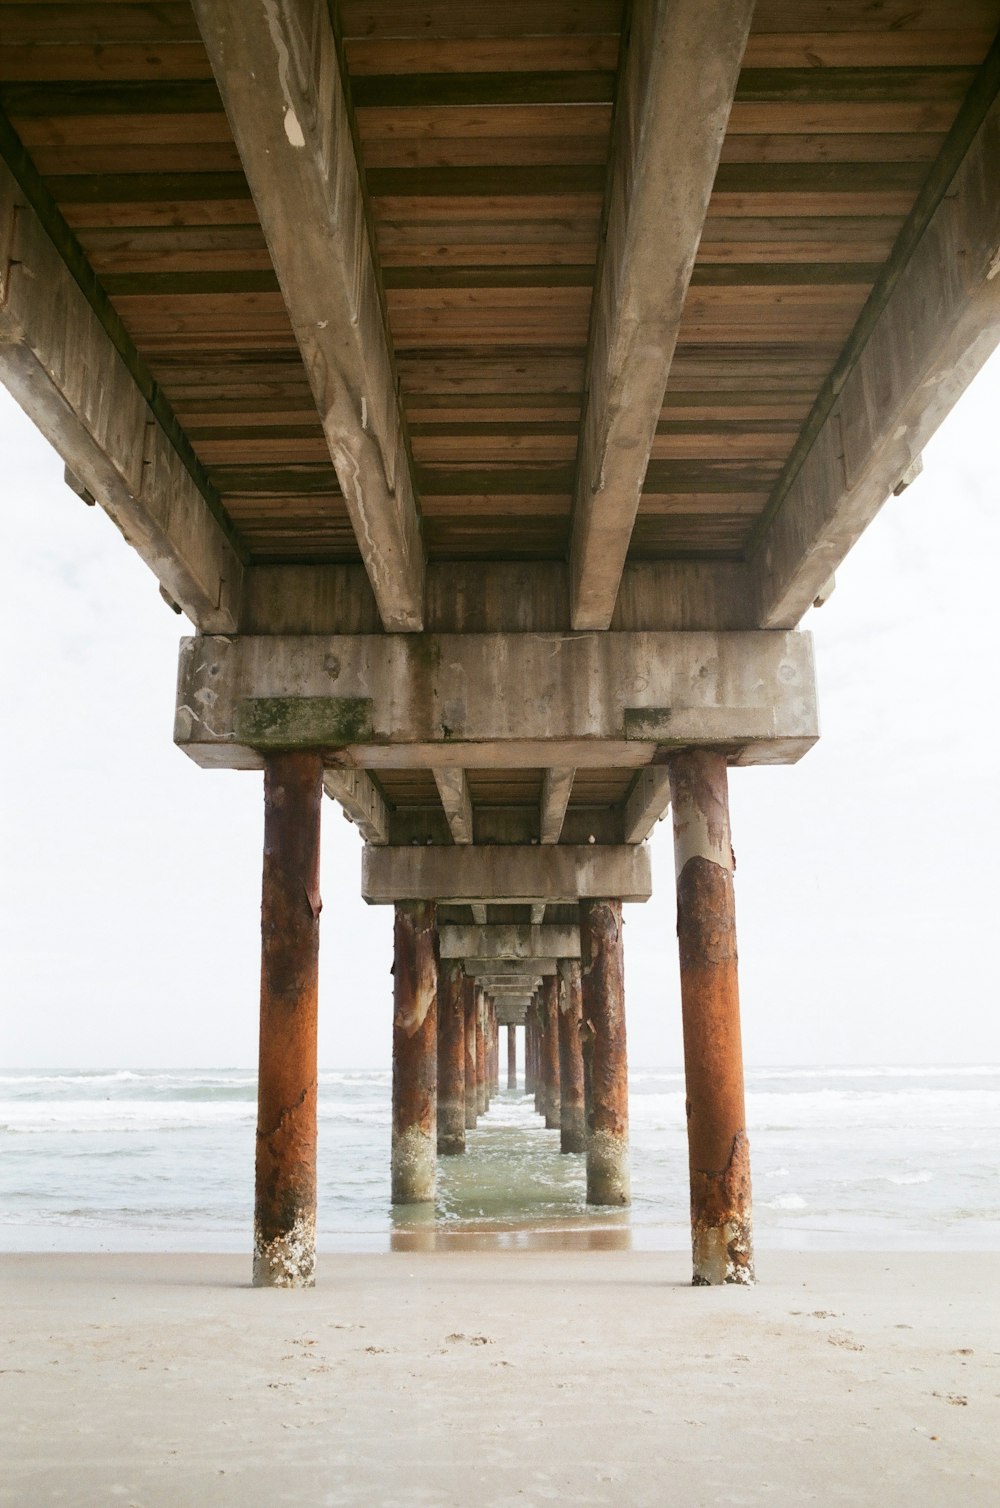 the underside of a wooden pier on a beach